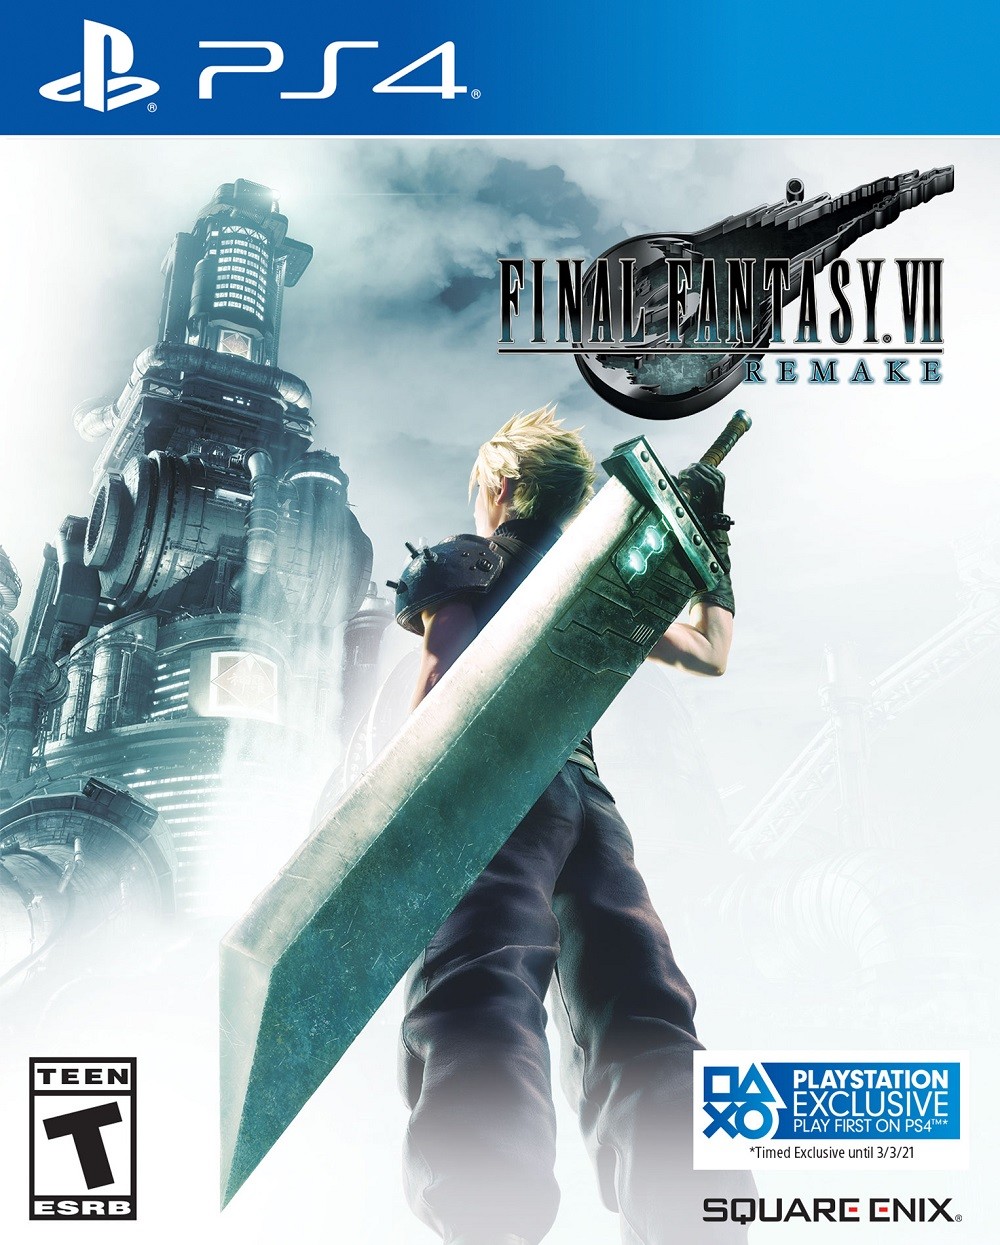 final-fantasy-vii-remake-xbox-pc-ps4-timed